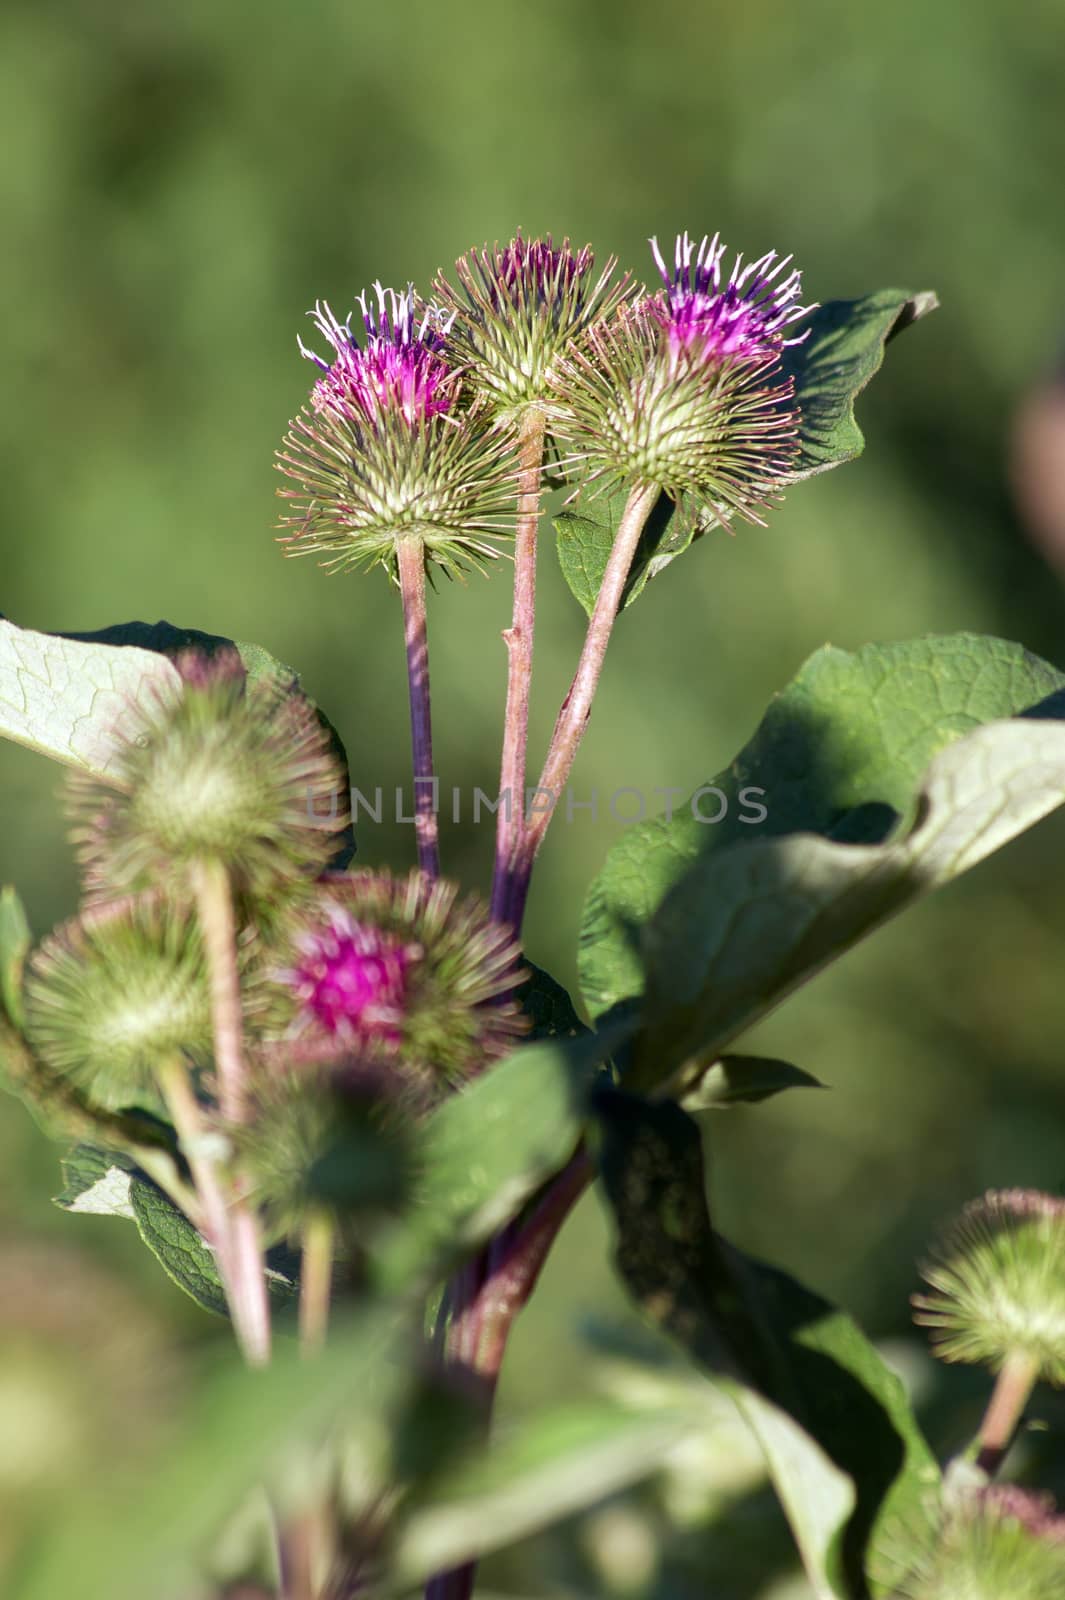 Roadsides thistle (Carduus acanthoides) is a common weed.